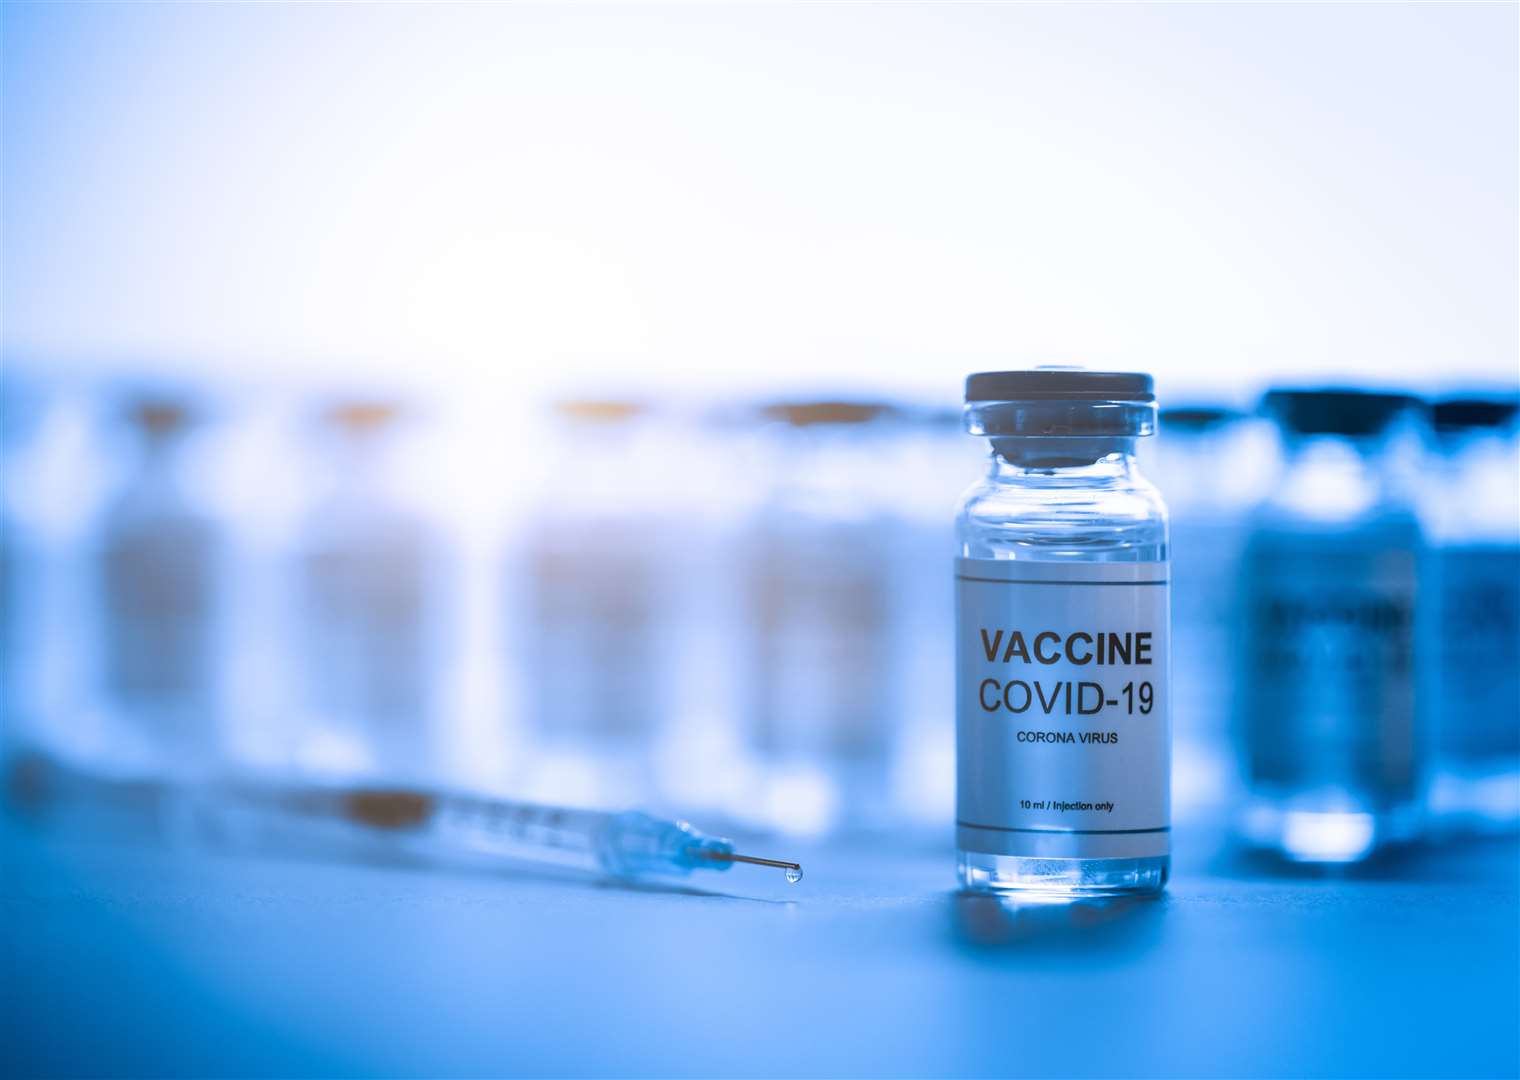 A pop-up vaccination centre will be open at The East Malling Centre on Monday